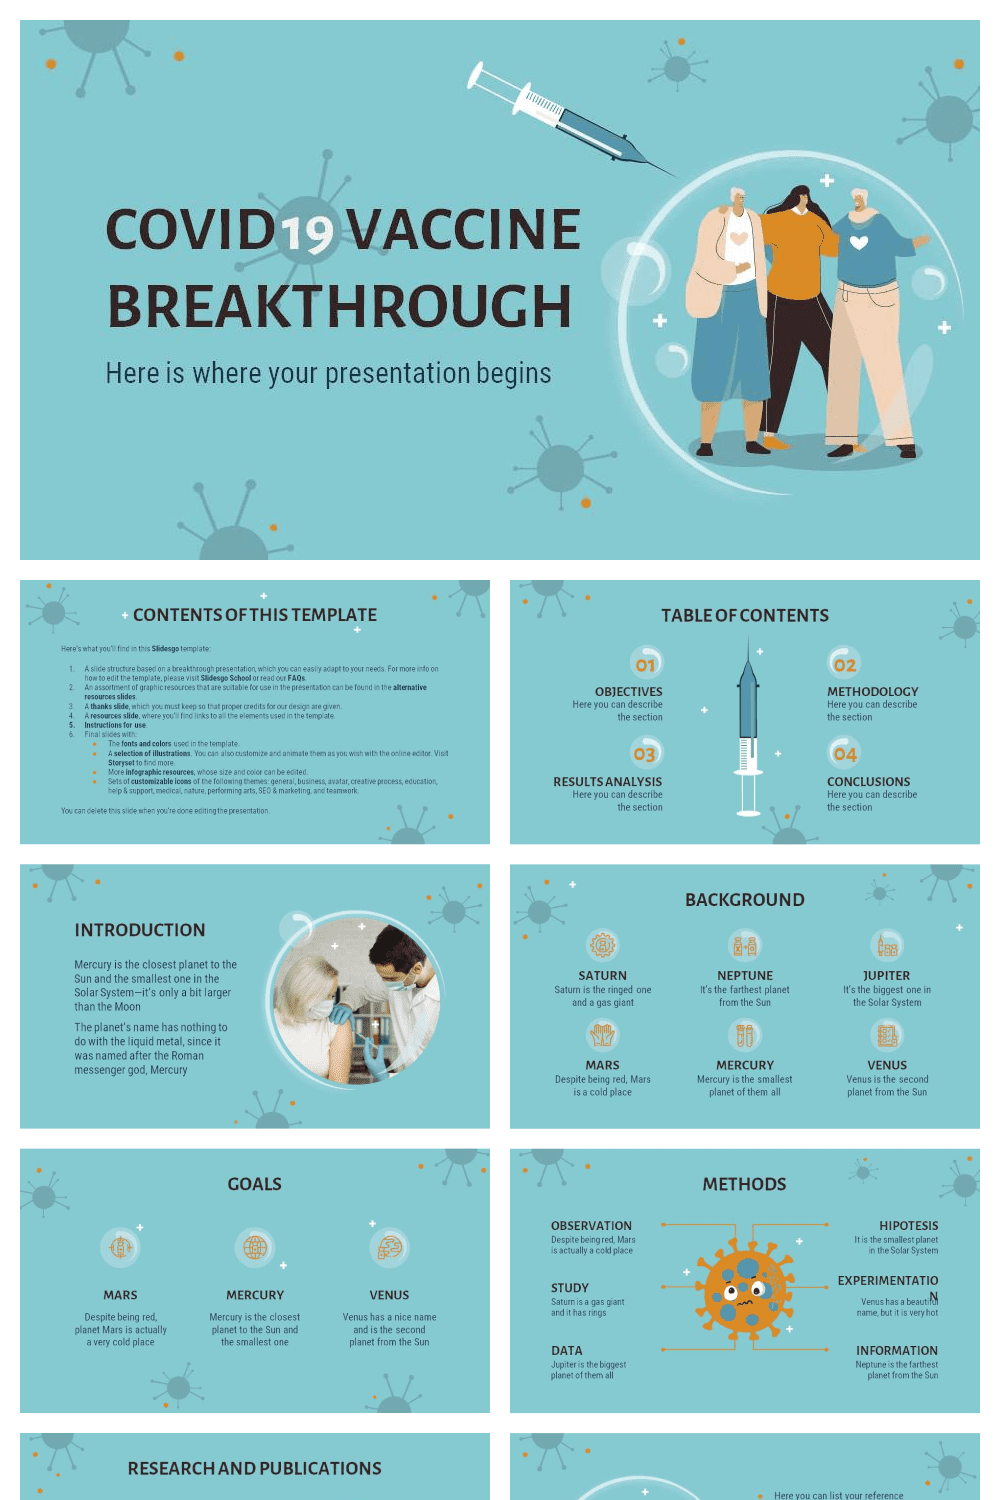 Free COVID-19 Vaccine Breakthrough Powerpoint template by MasterBundles Pinterest Collage Image.